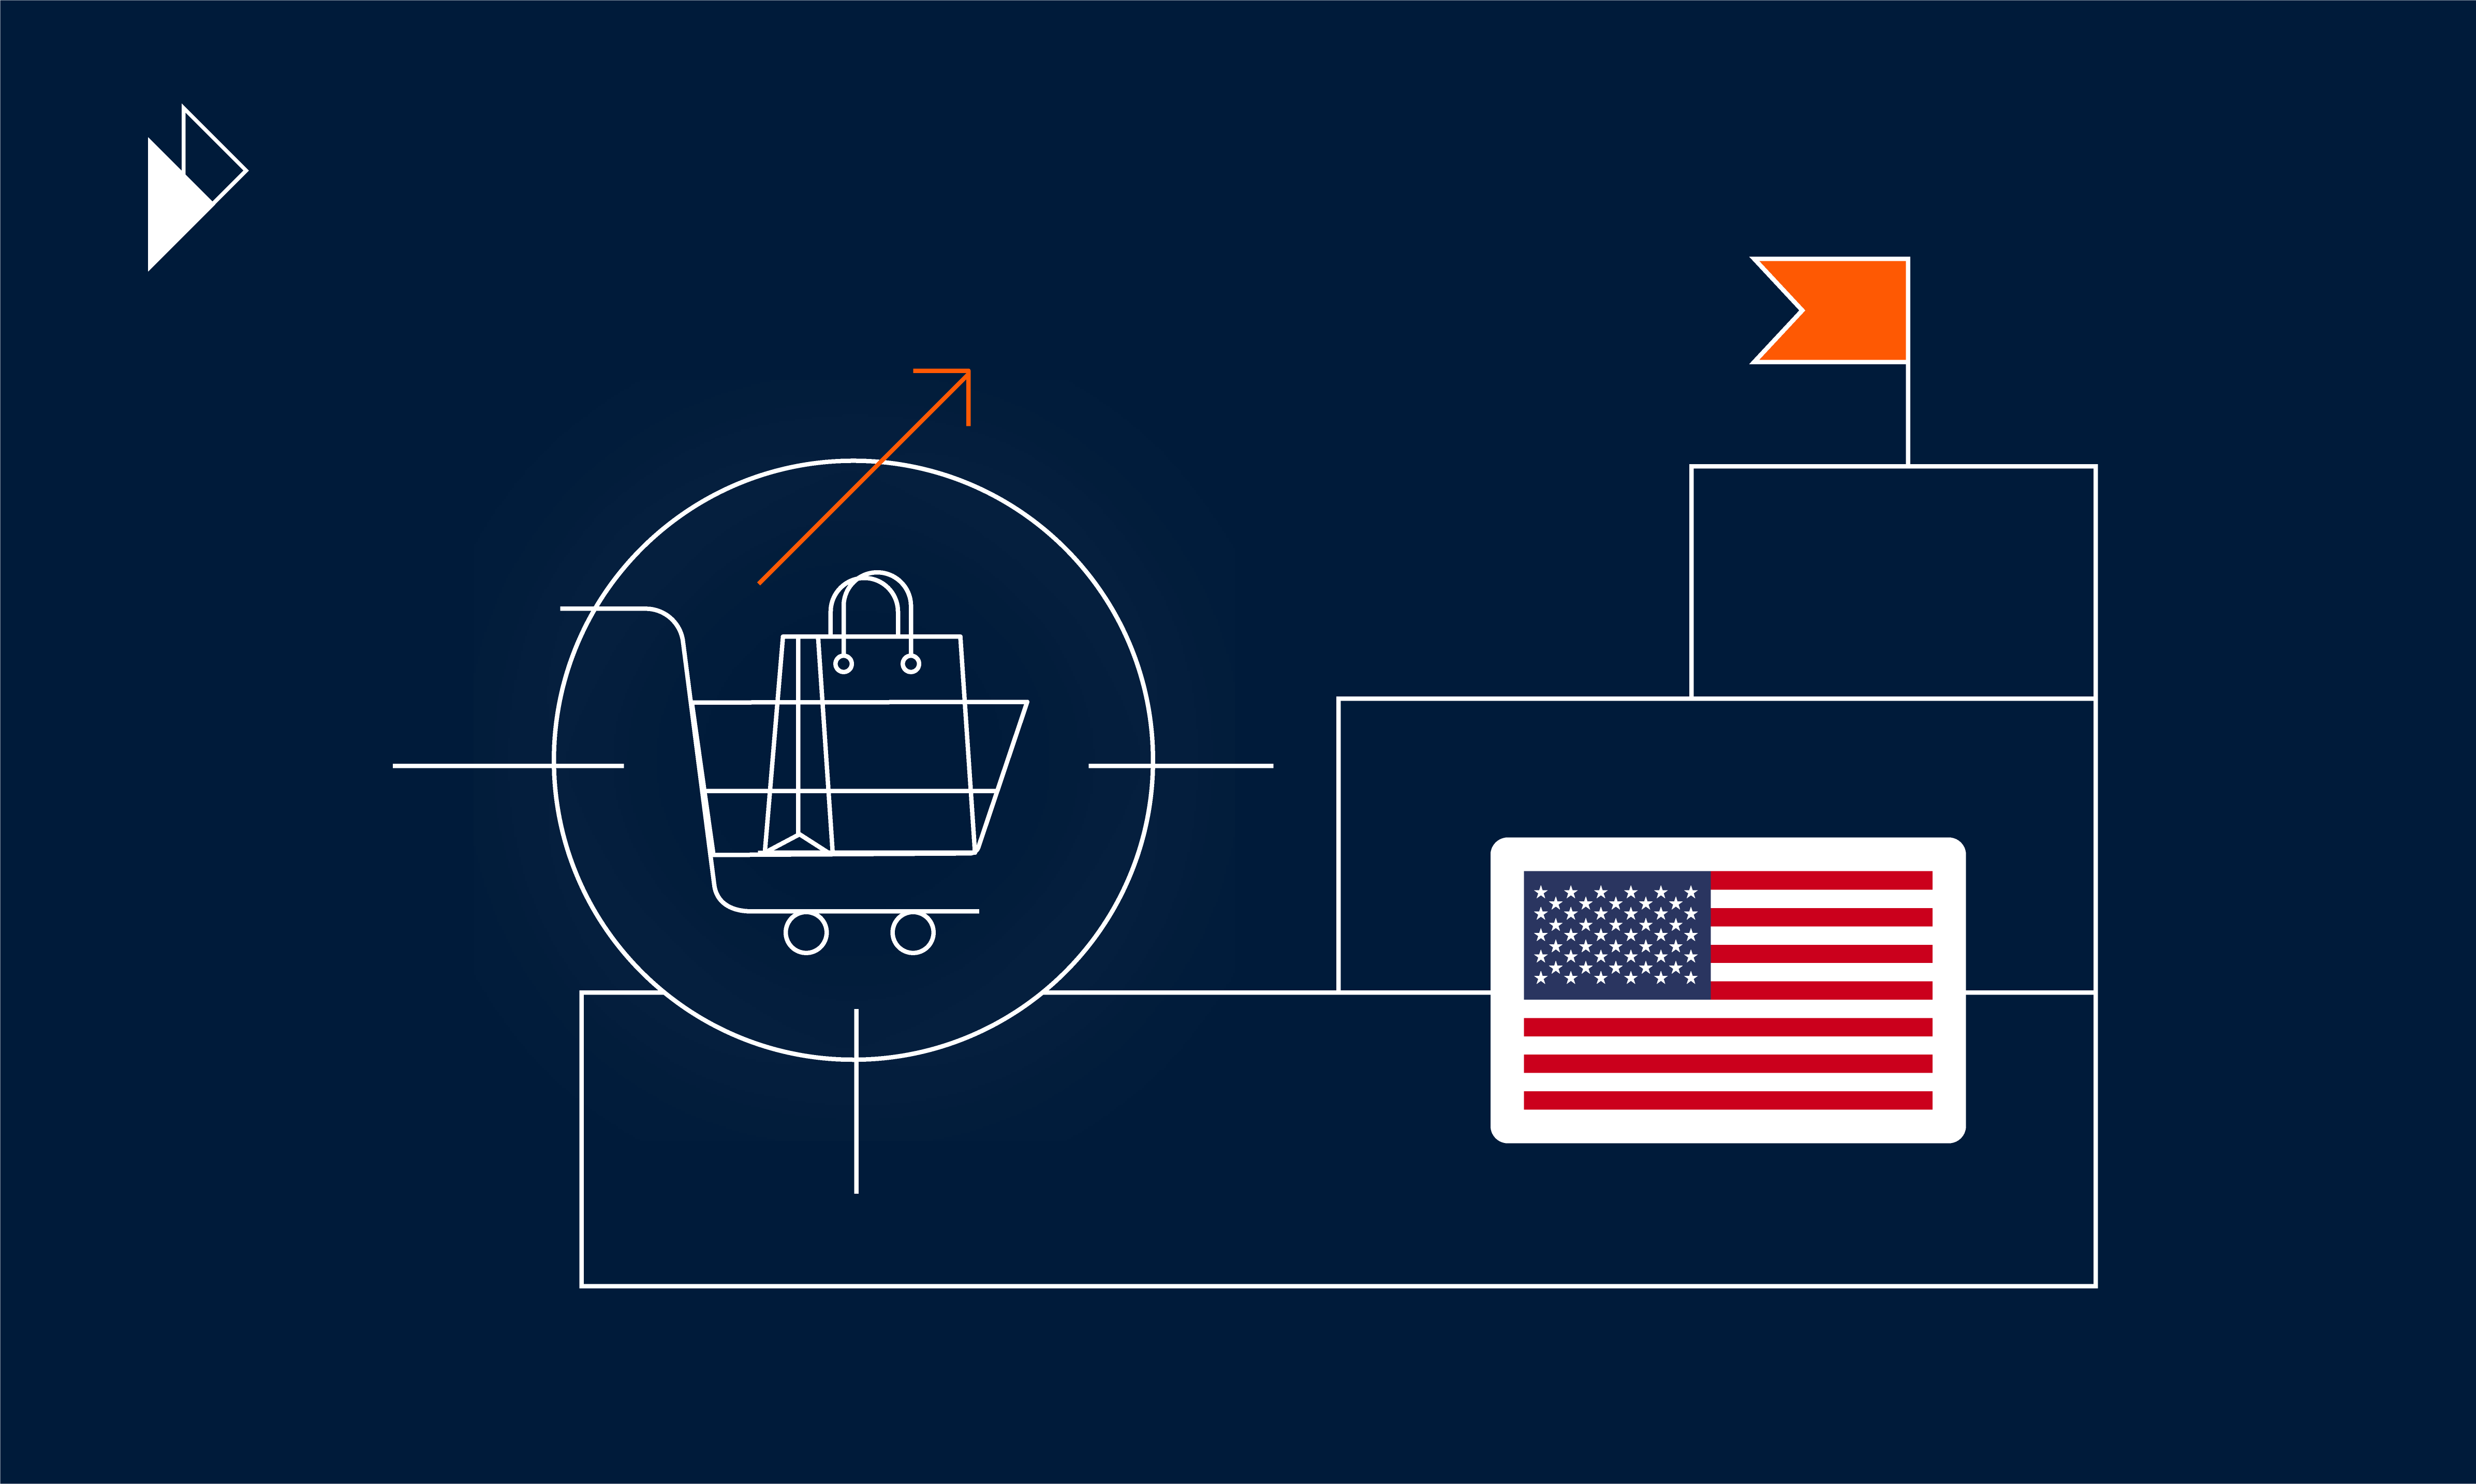 This is the header image for a blog post. Topic is US e-commerce logistics. Post provides insights and data into the US e-commerce logistics market. It also provides advice on how to leverage data to prepare an e-commerce business for future challenges and opportunities. Image is an abstract design that includes a shopping cart, charts, and the USA flag.  